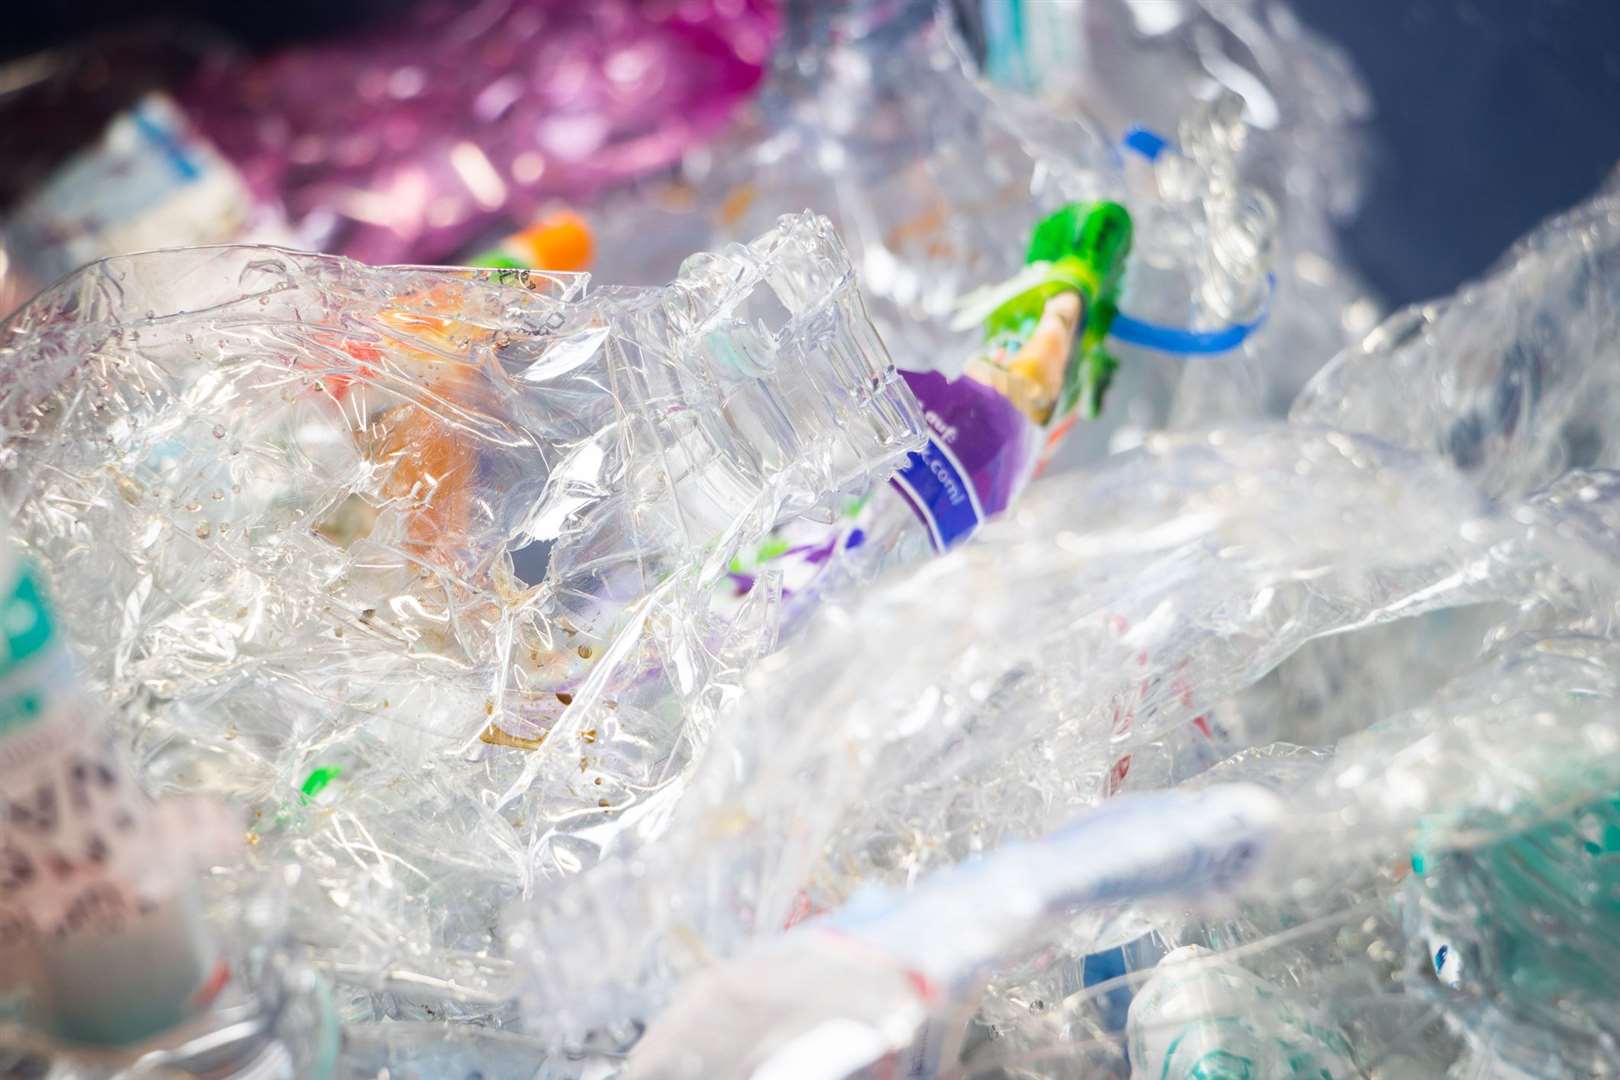 The government is exploring new ways to encourage people to recycle empty plastic bottles. Image: iStock.